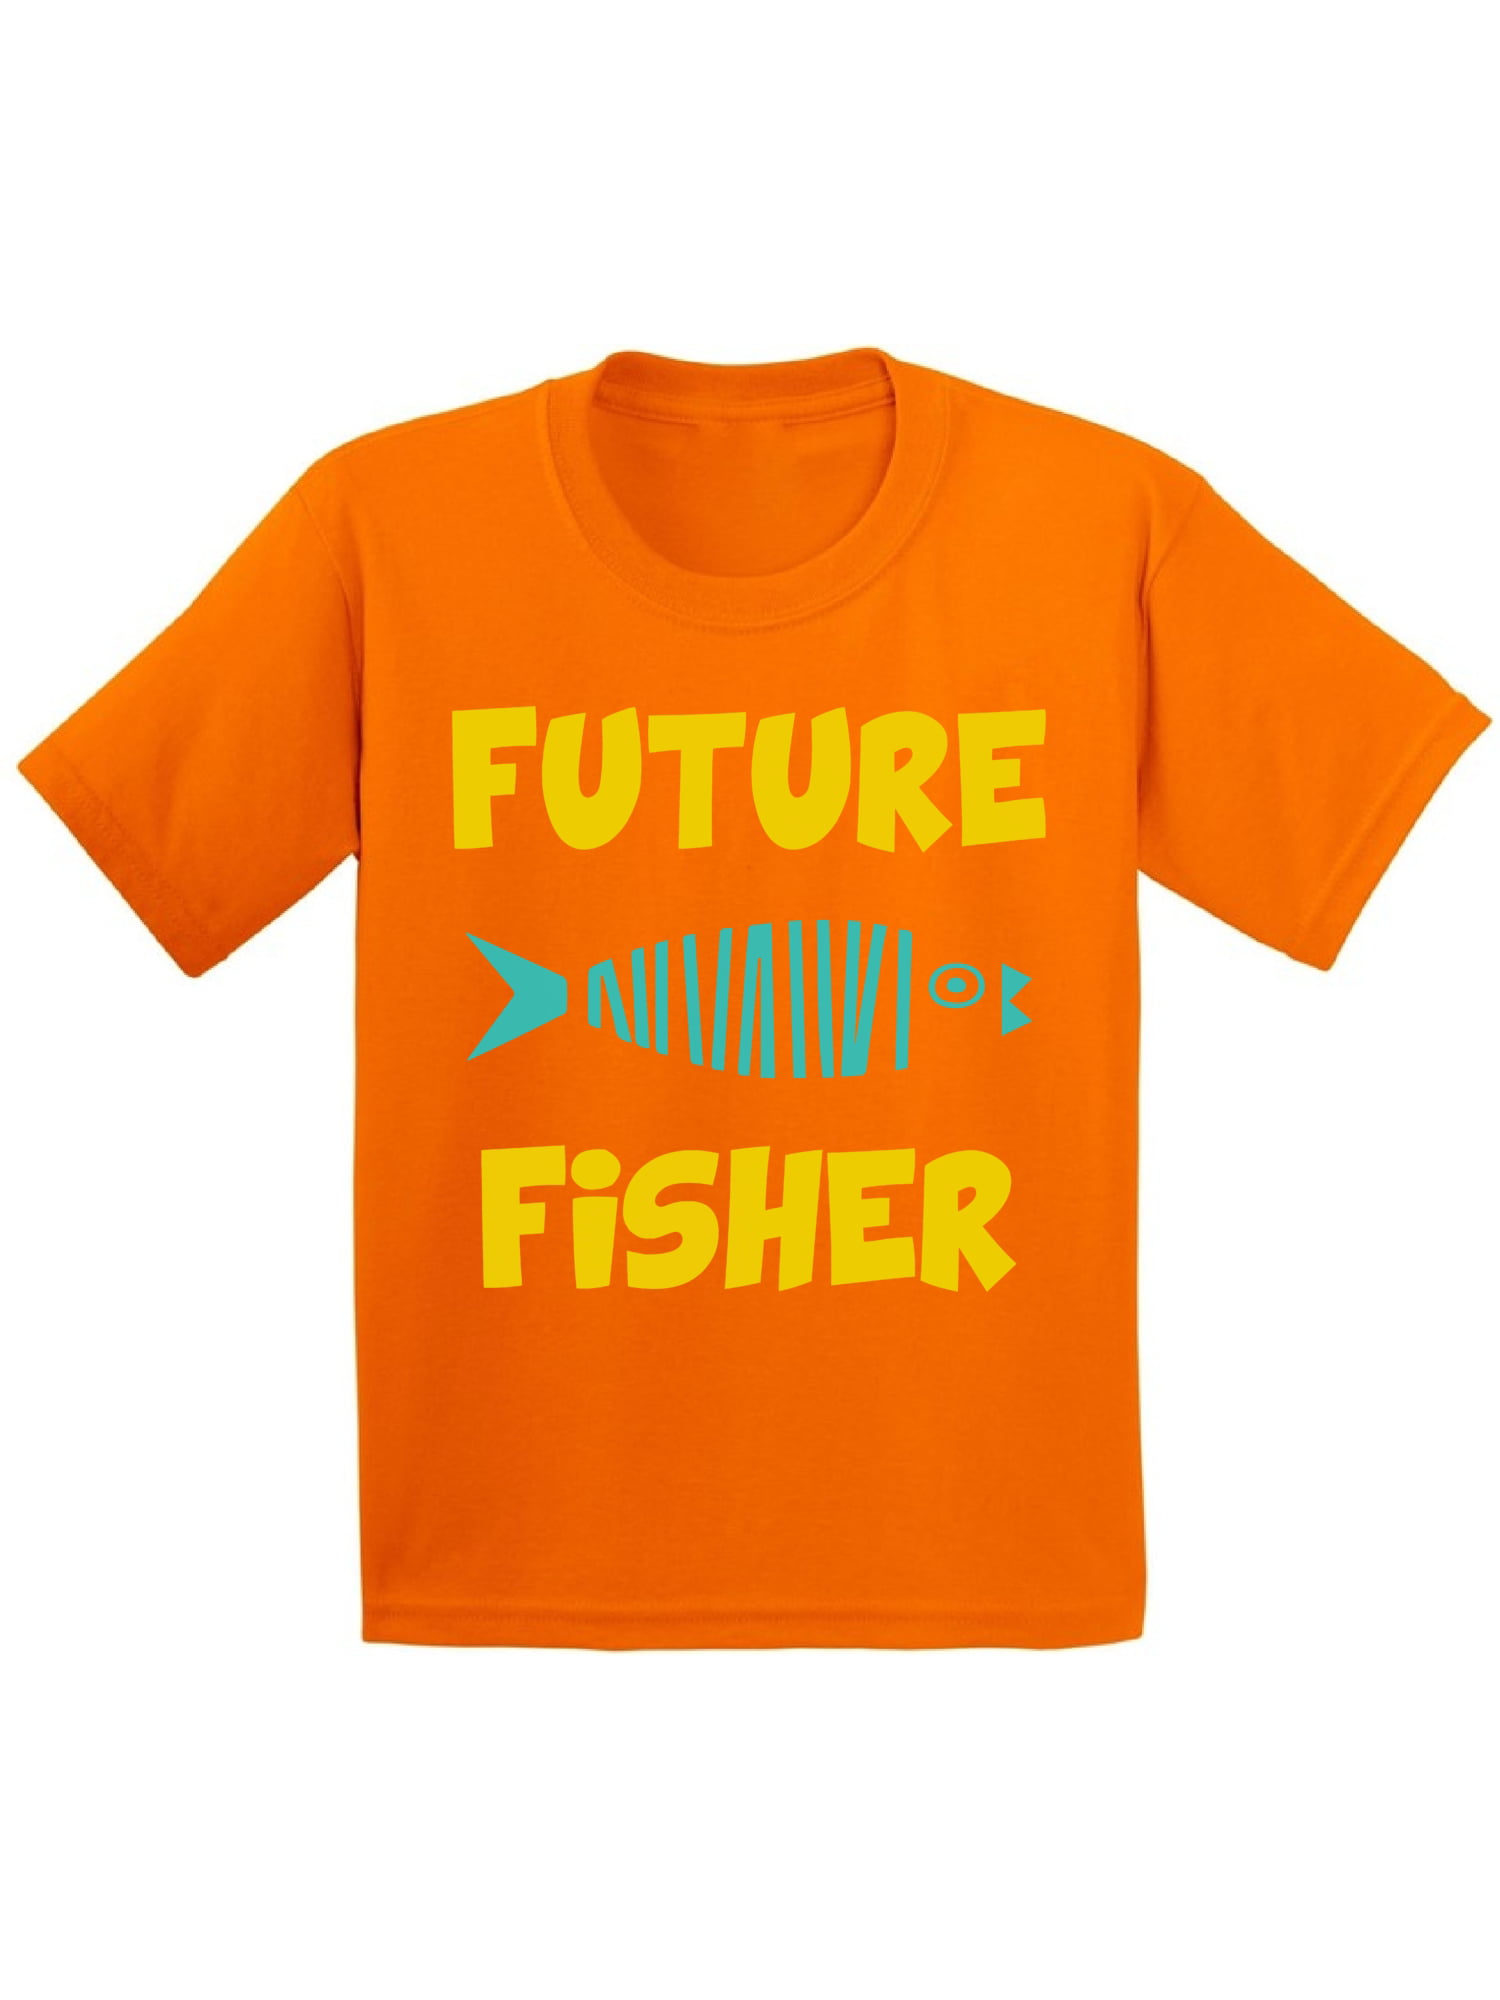 Awkward Styles Shirt for Kids Happy Fisher Shirt for Kids Fishing T Shirt  for Boys Future Fisher Shirt for Girls Fishing Lovers Gifts Fisher T Shirt  for Children Future Fisher Shirt for